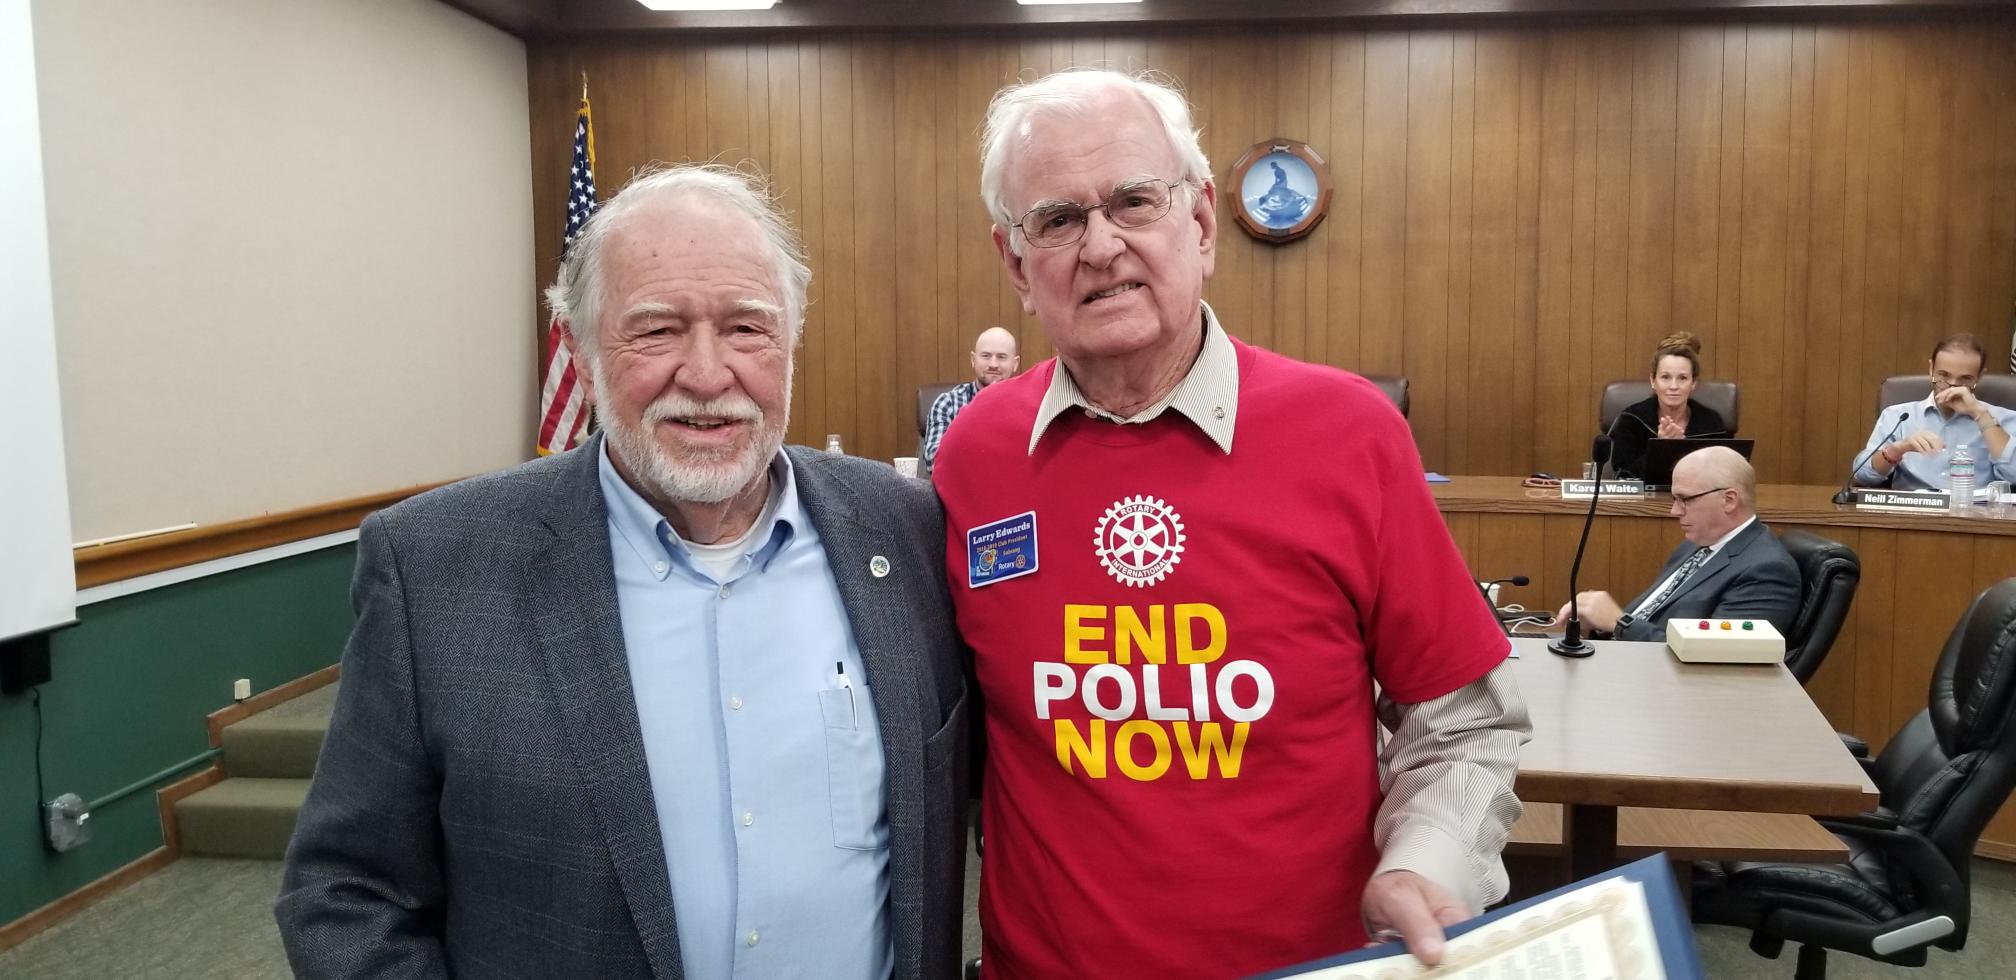 Solvang Rotary Club marks World Polio Day